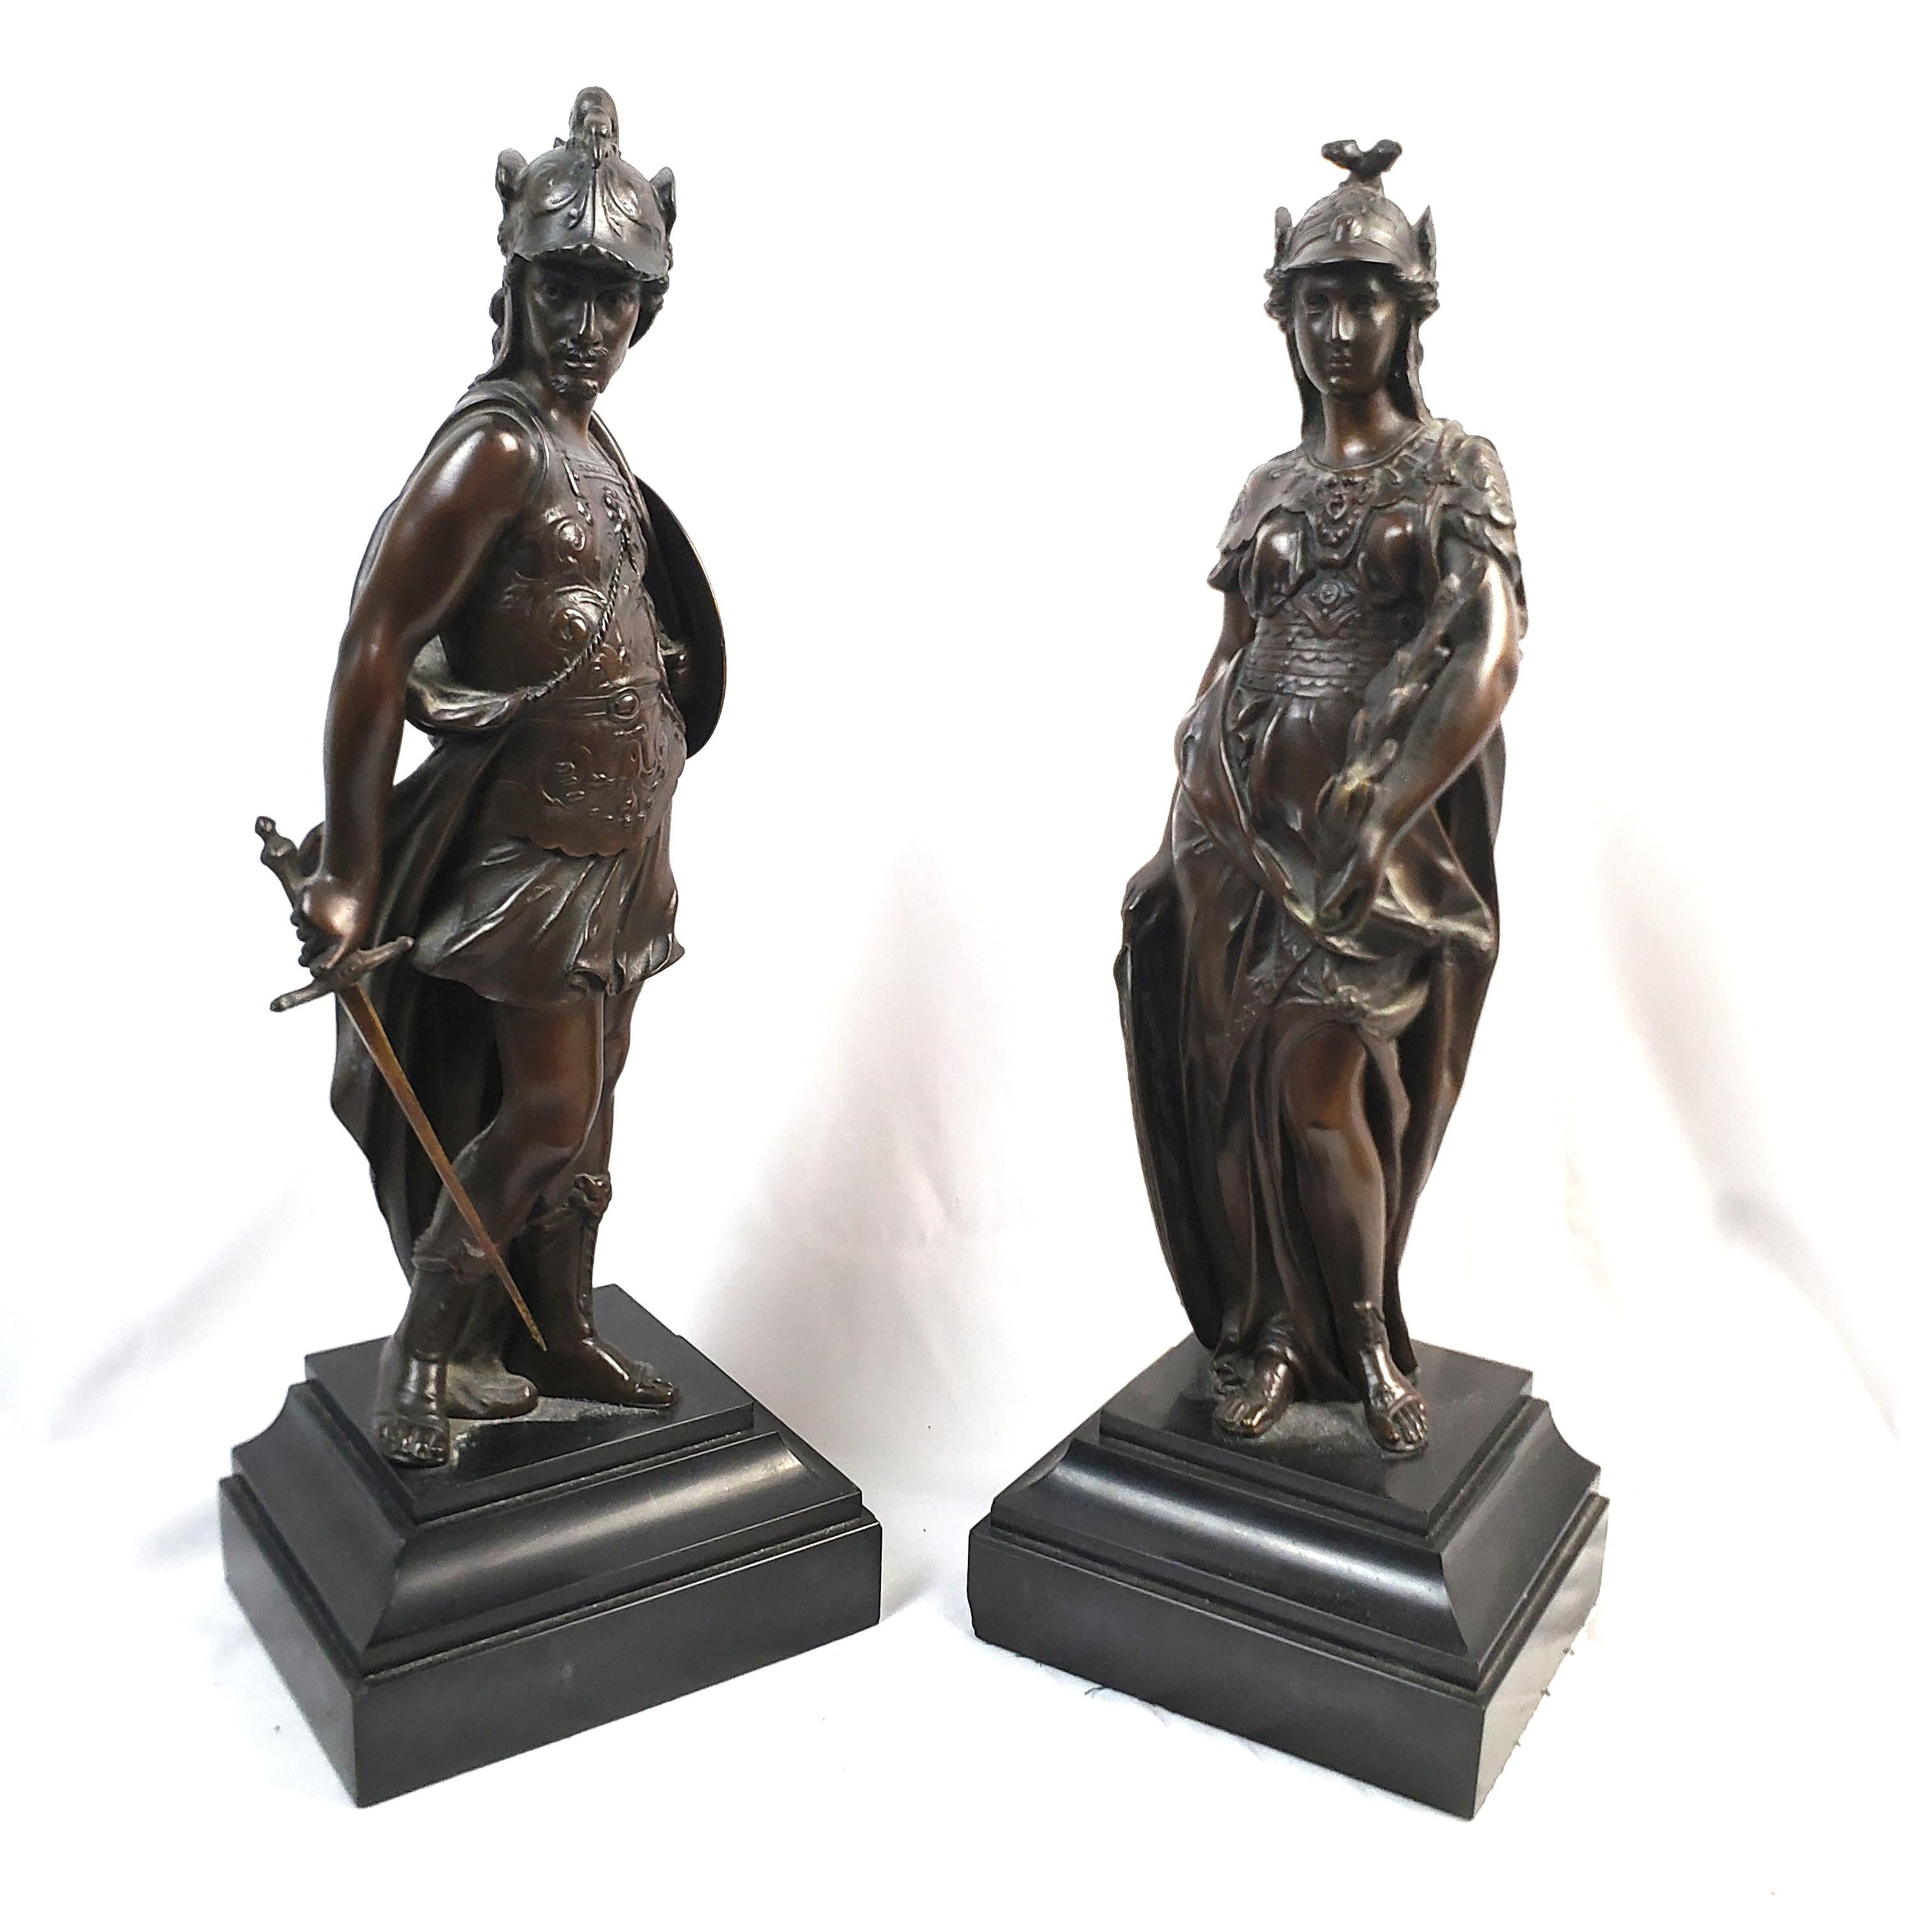 Renaissance Revival Pair of Antique French Bronze Figural Sculptures of Mars and Minerva For Sale